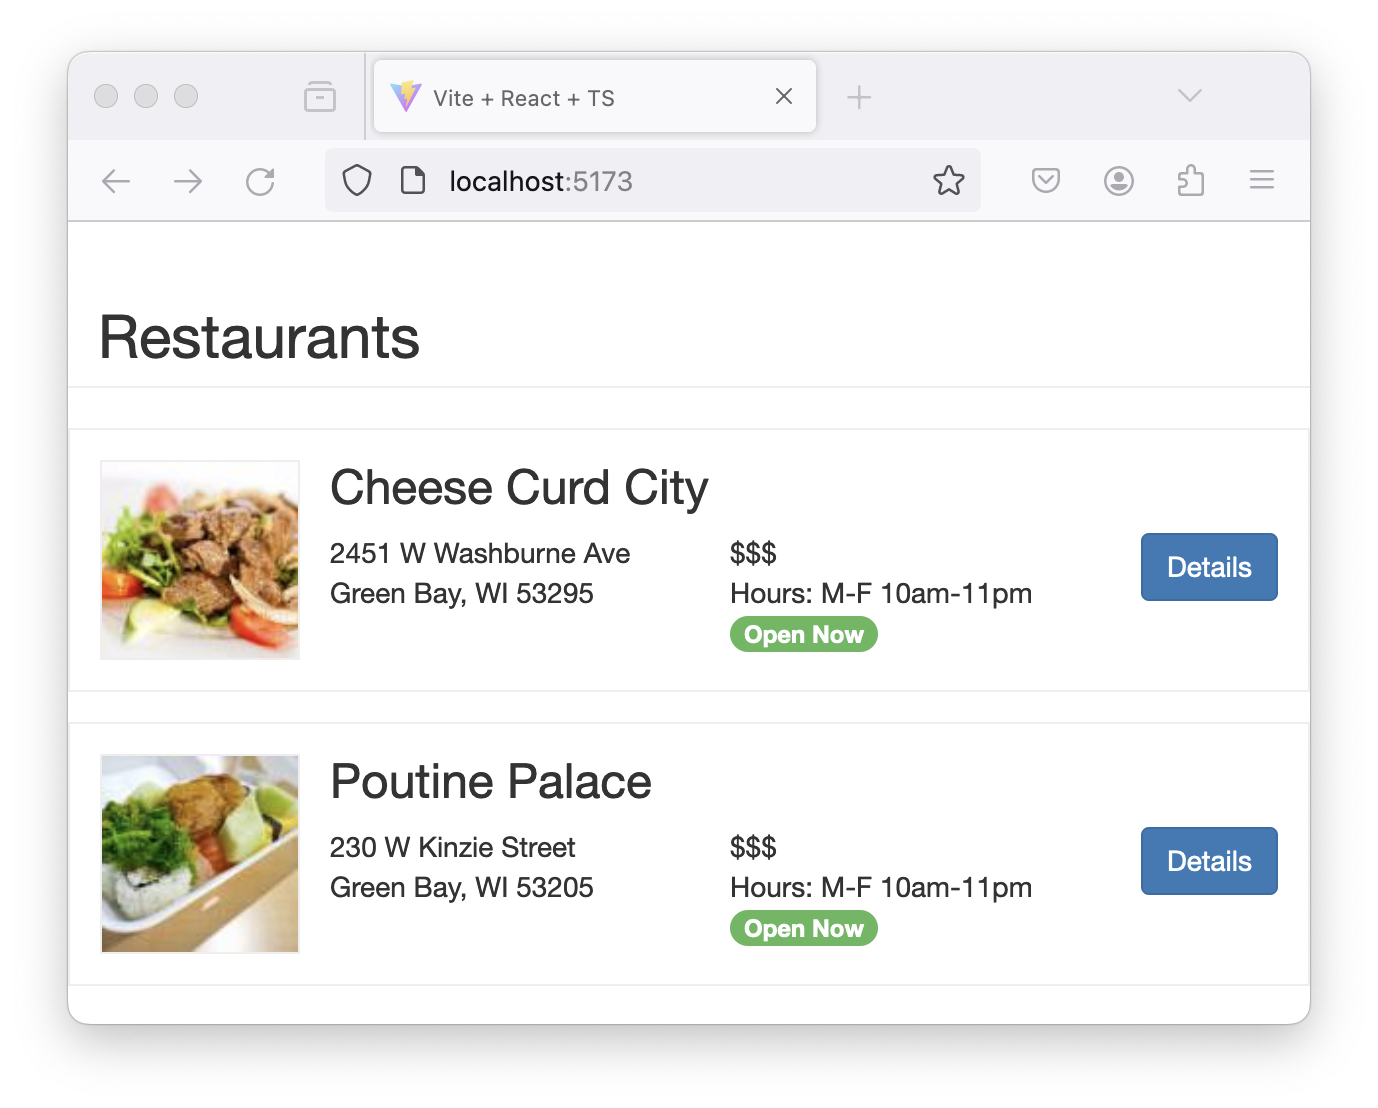 Screenshot of the same web application interface from Objective 1, except now there are multiple restaurants listed in the UI.